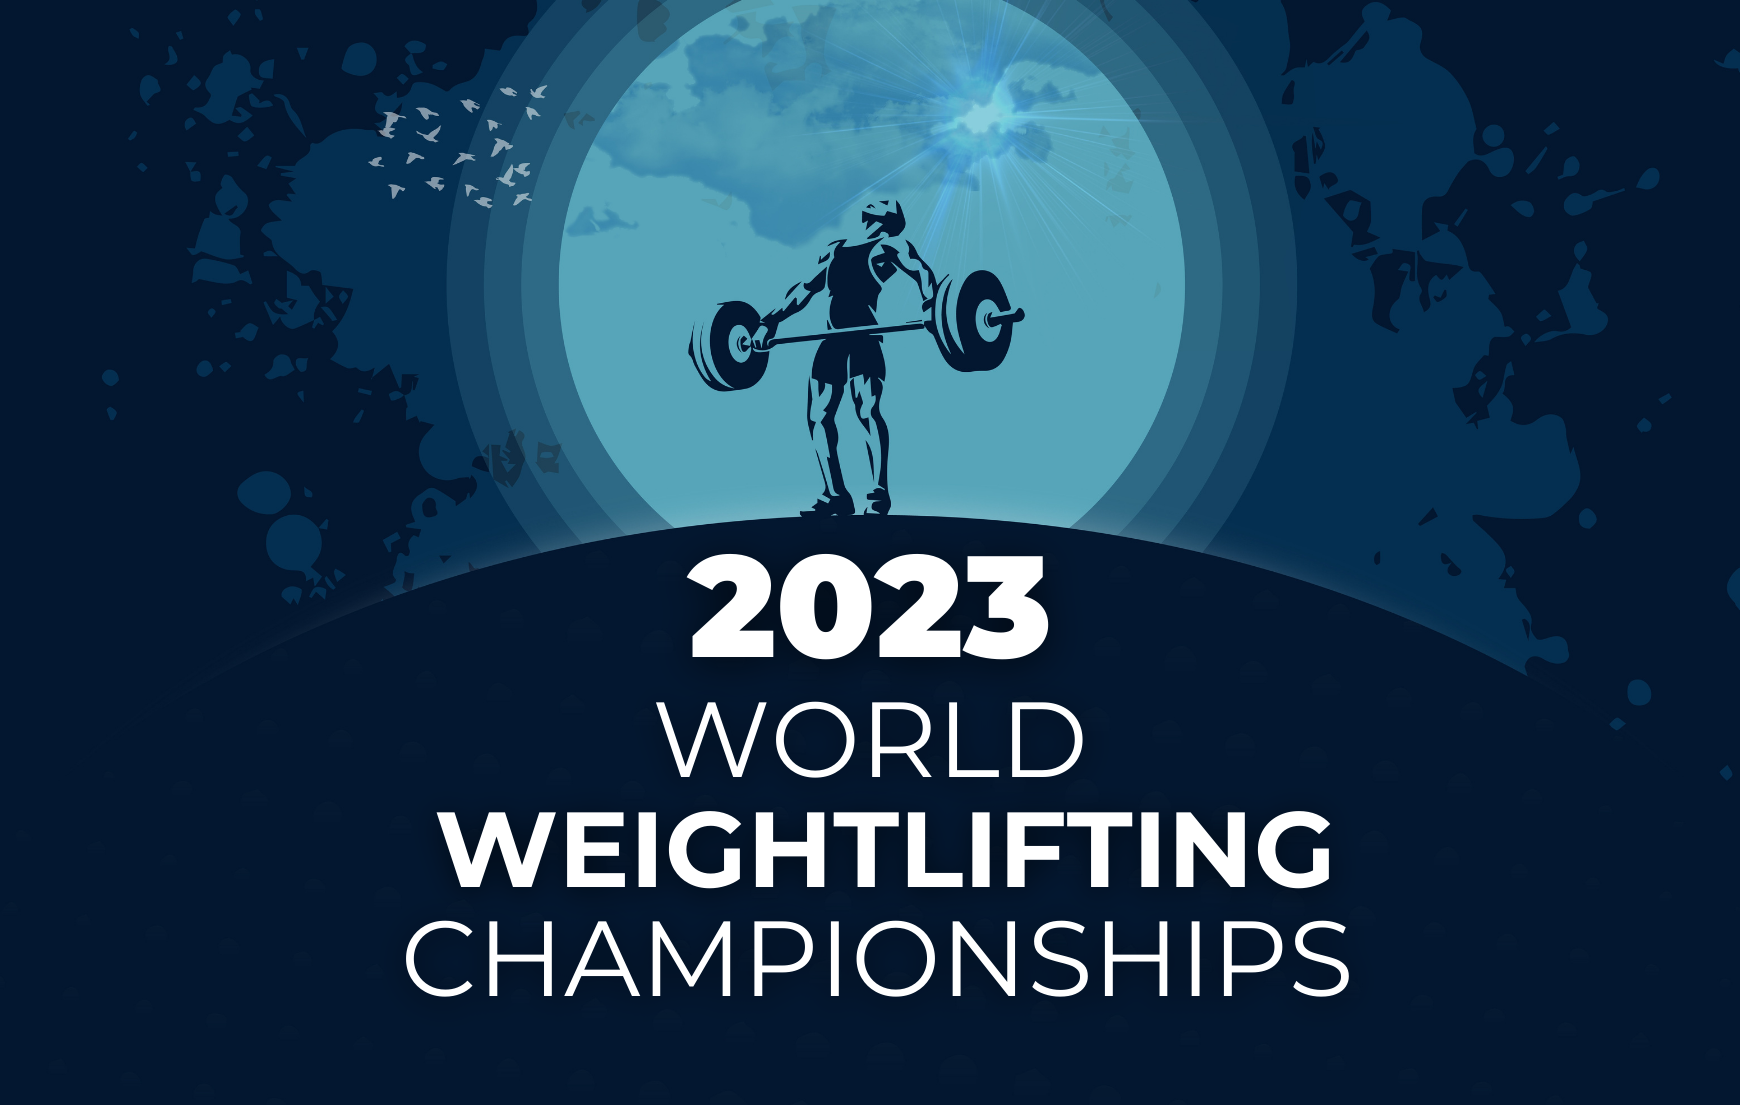 2023 World Weightlifting Championships: A Complete Guide to the Event